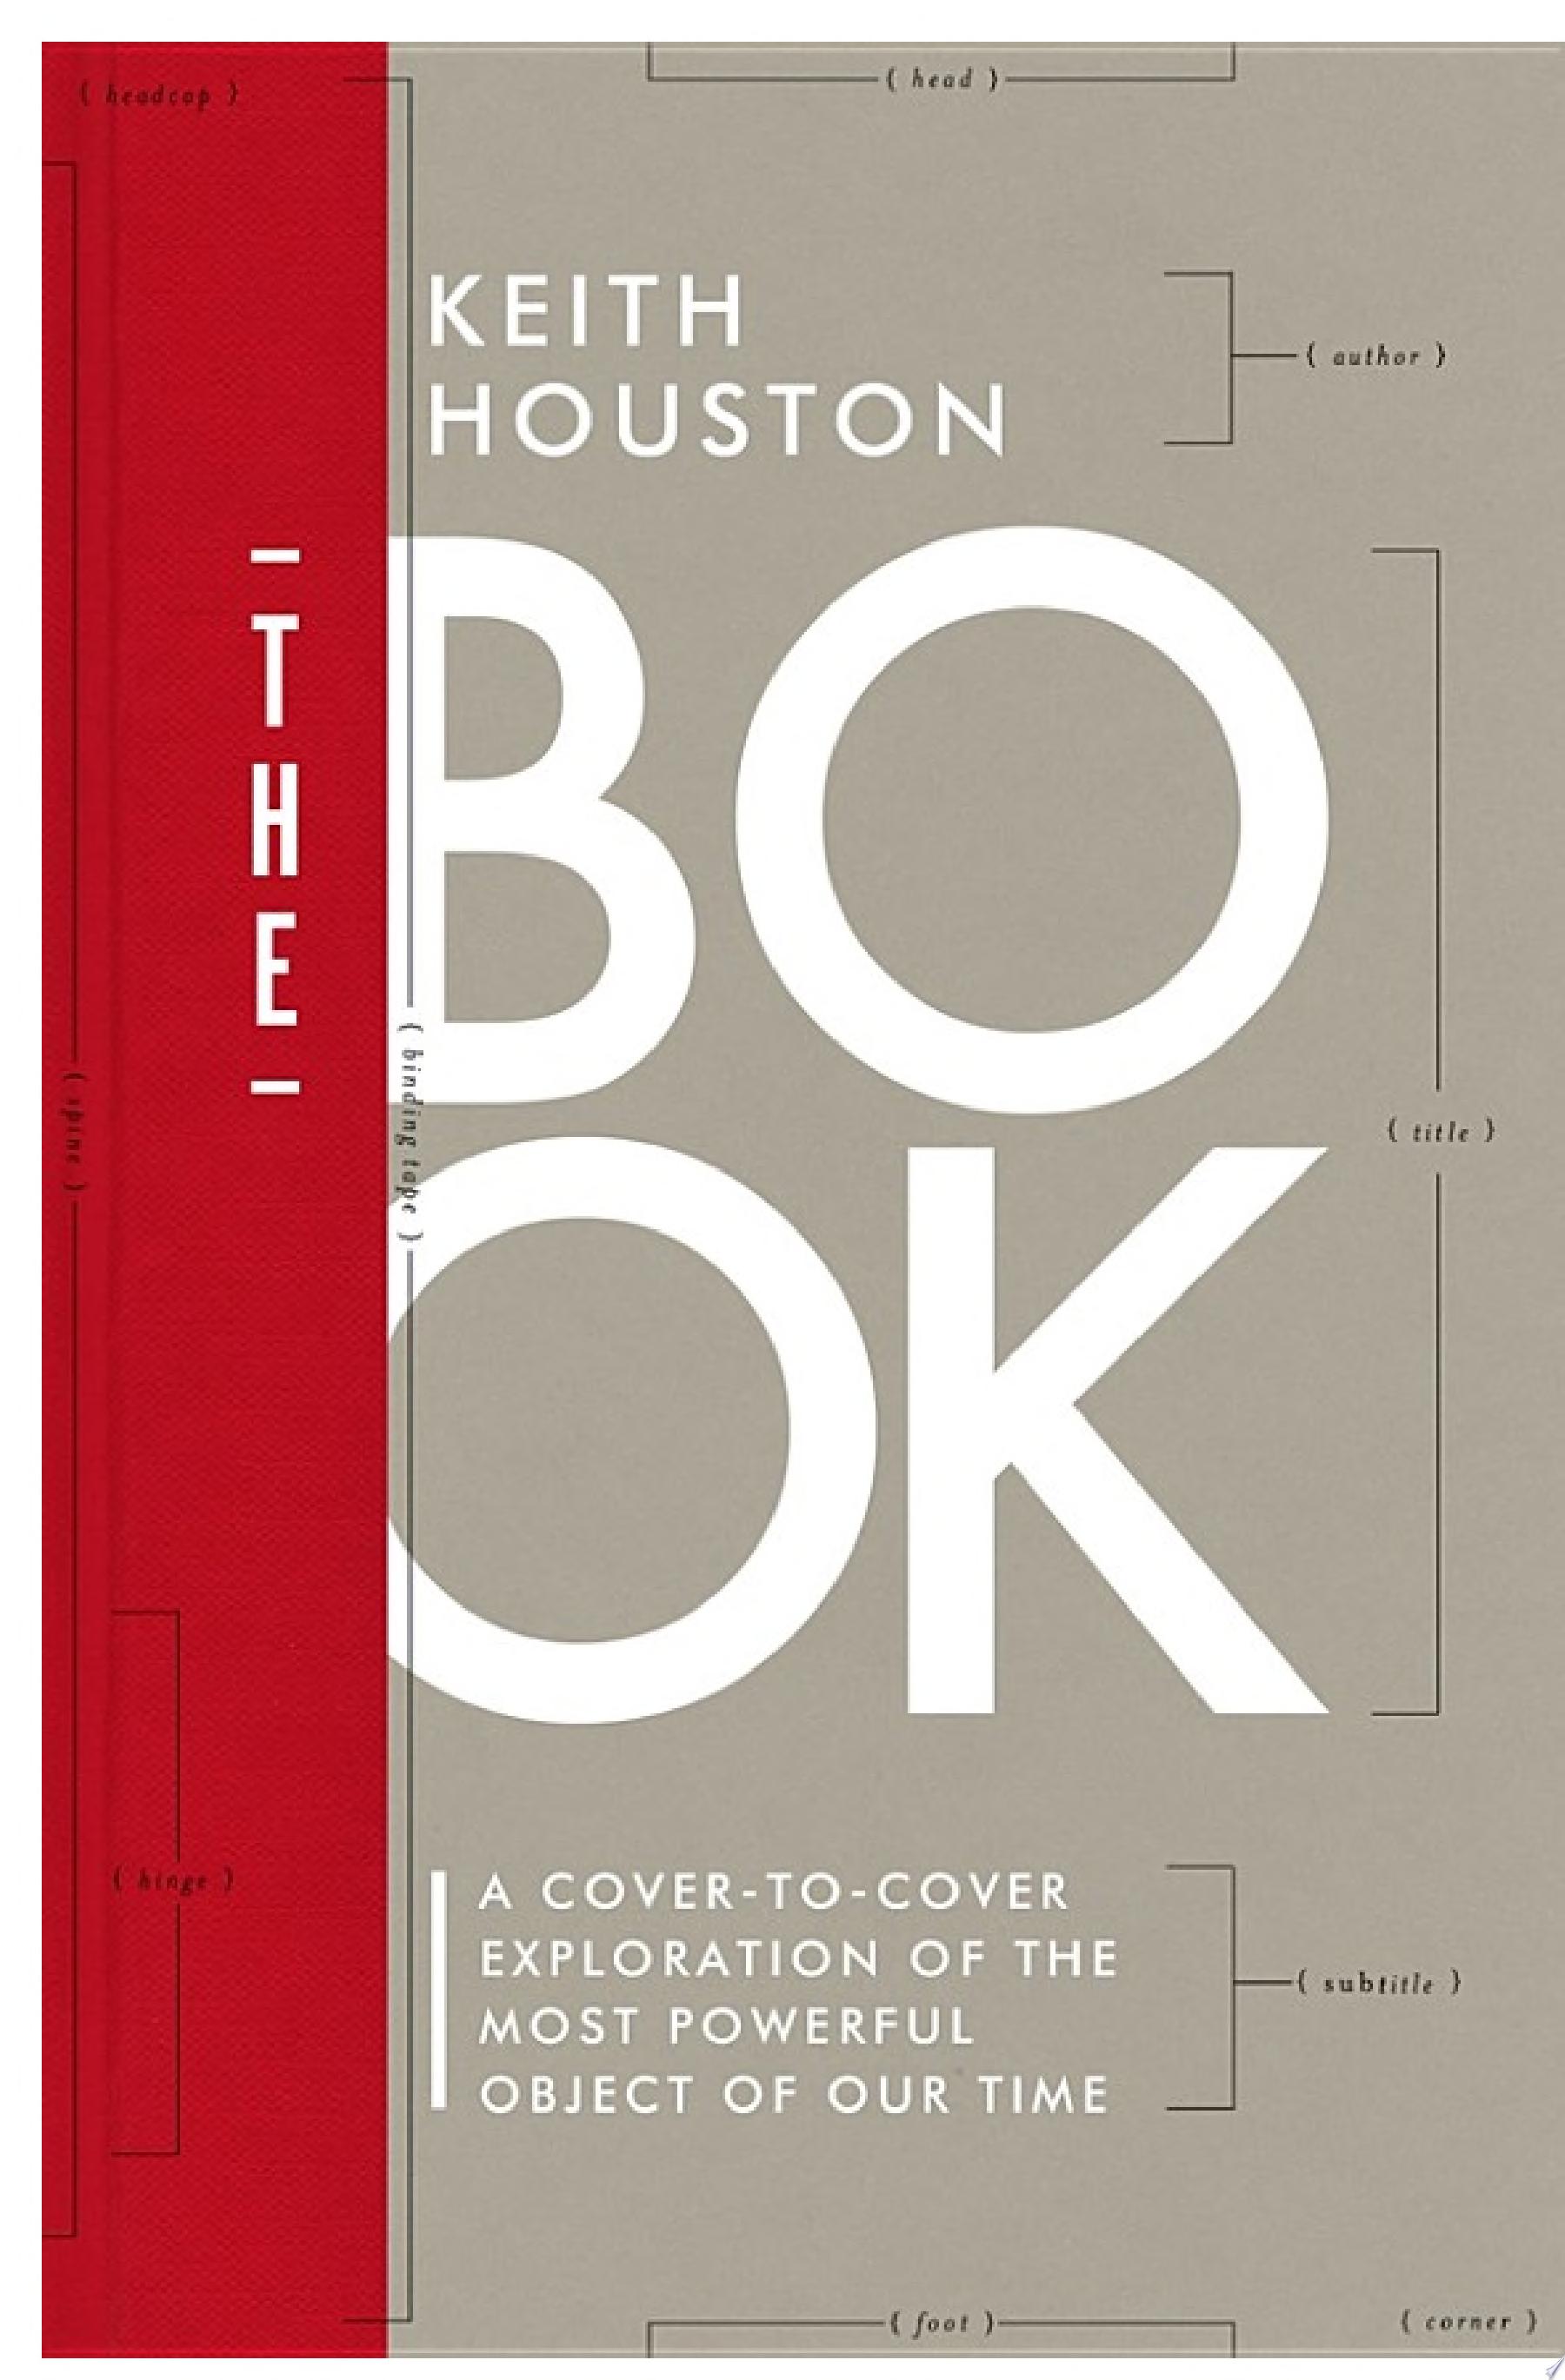 Image for "The Book: A Cover-to-Cover Exploration of the Most Powerful Object of Our Time"